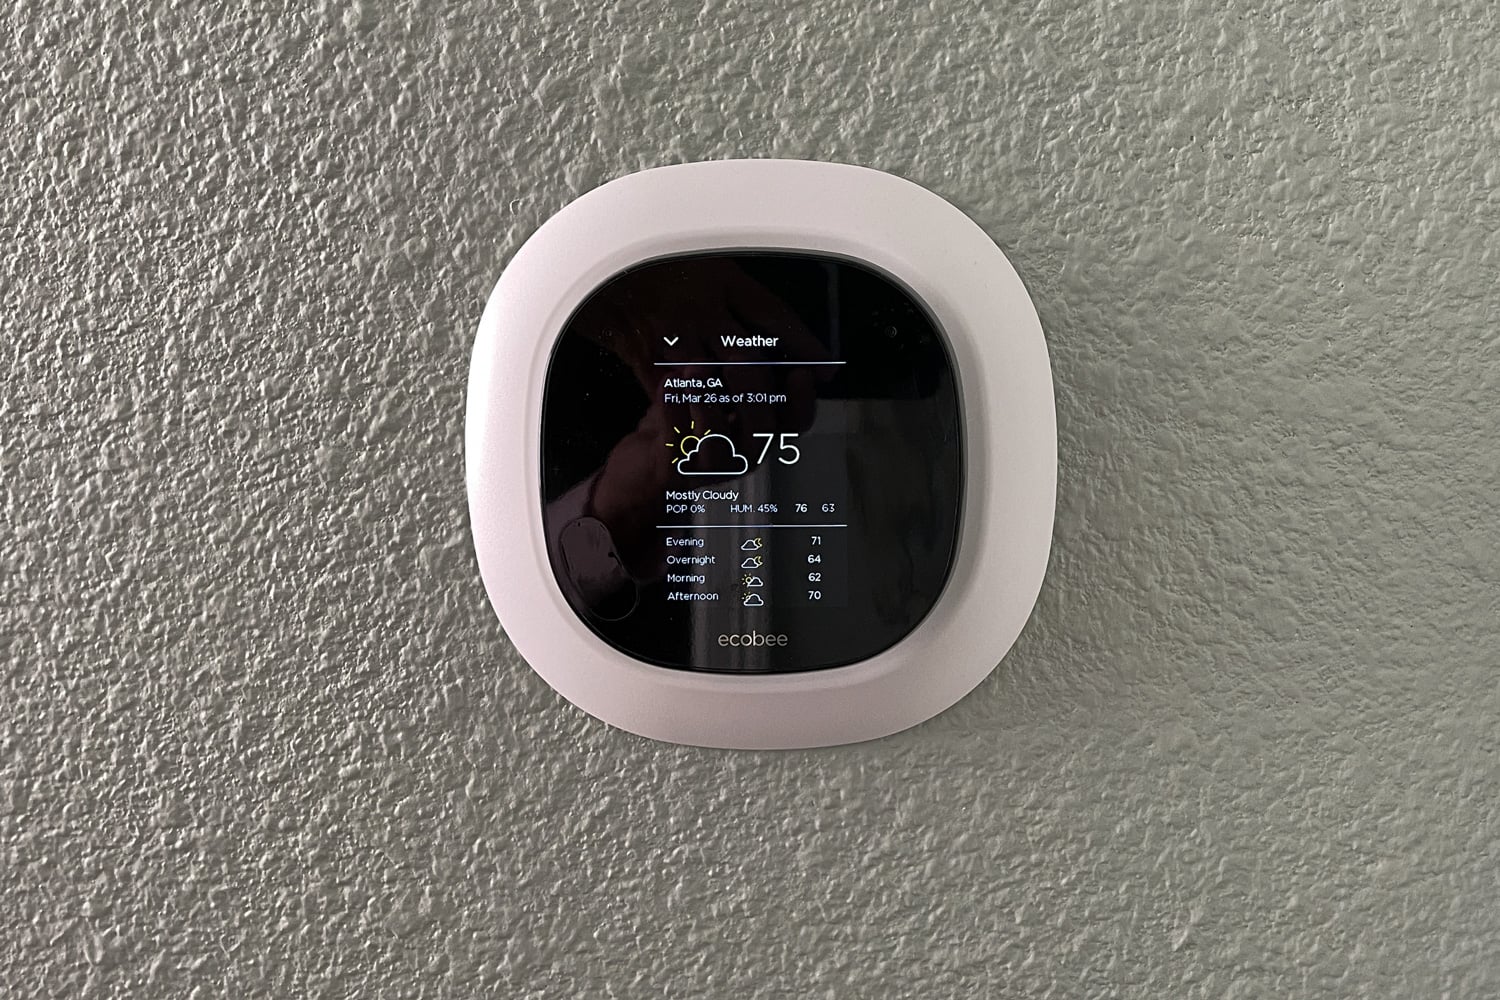 An Ecobee smart thermostat in a home